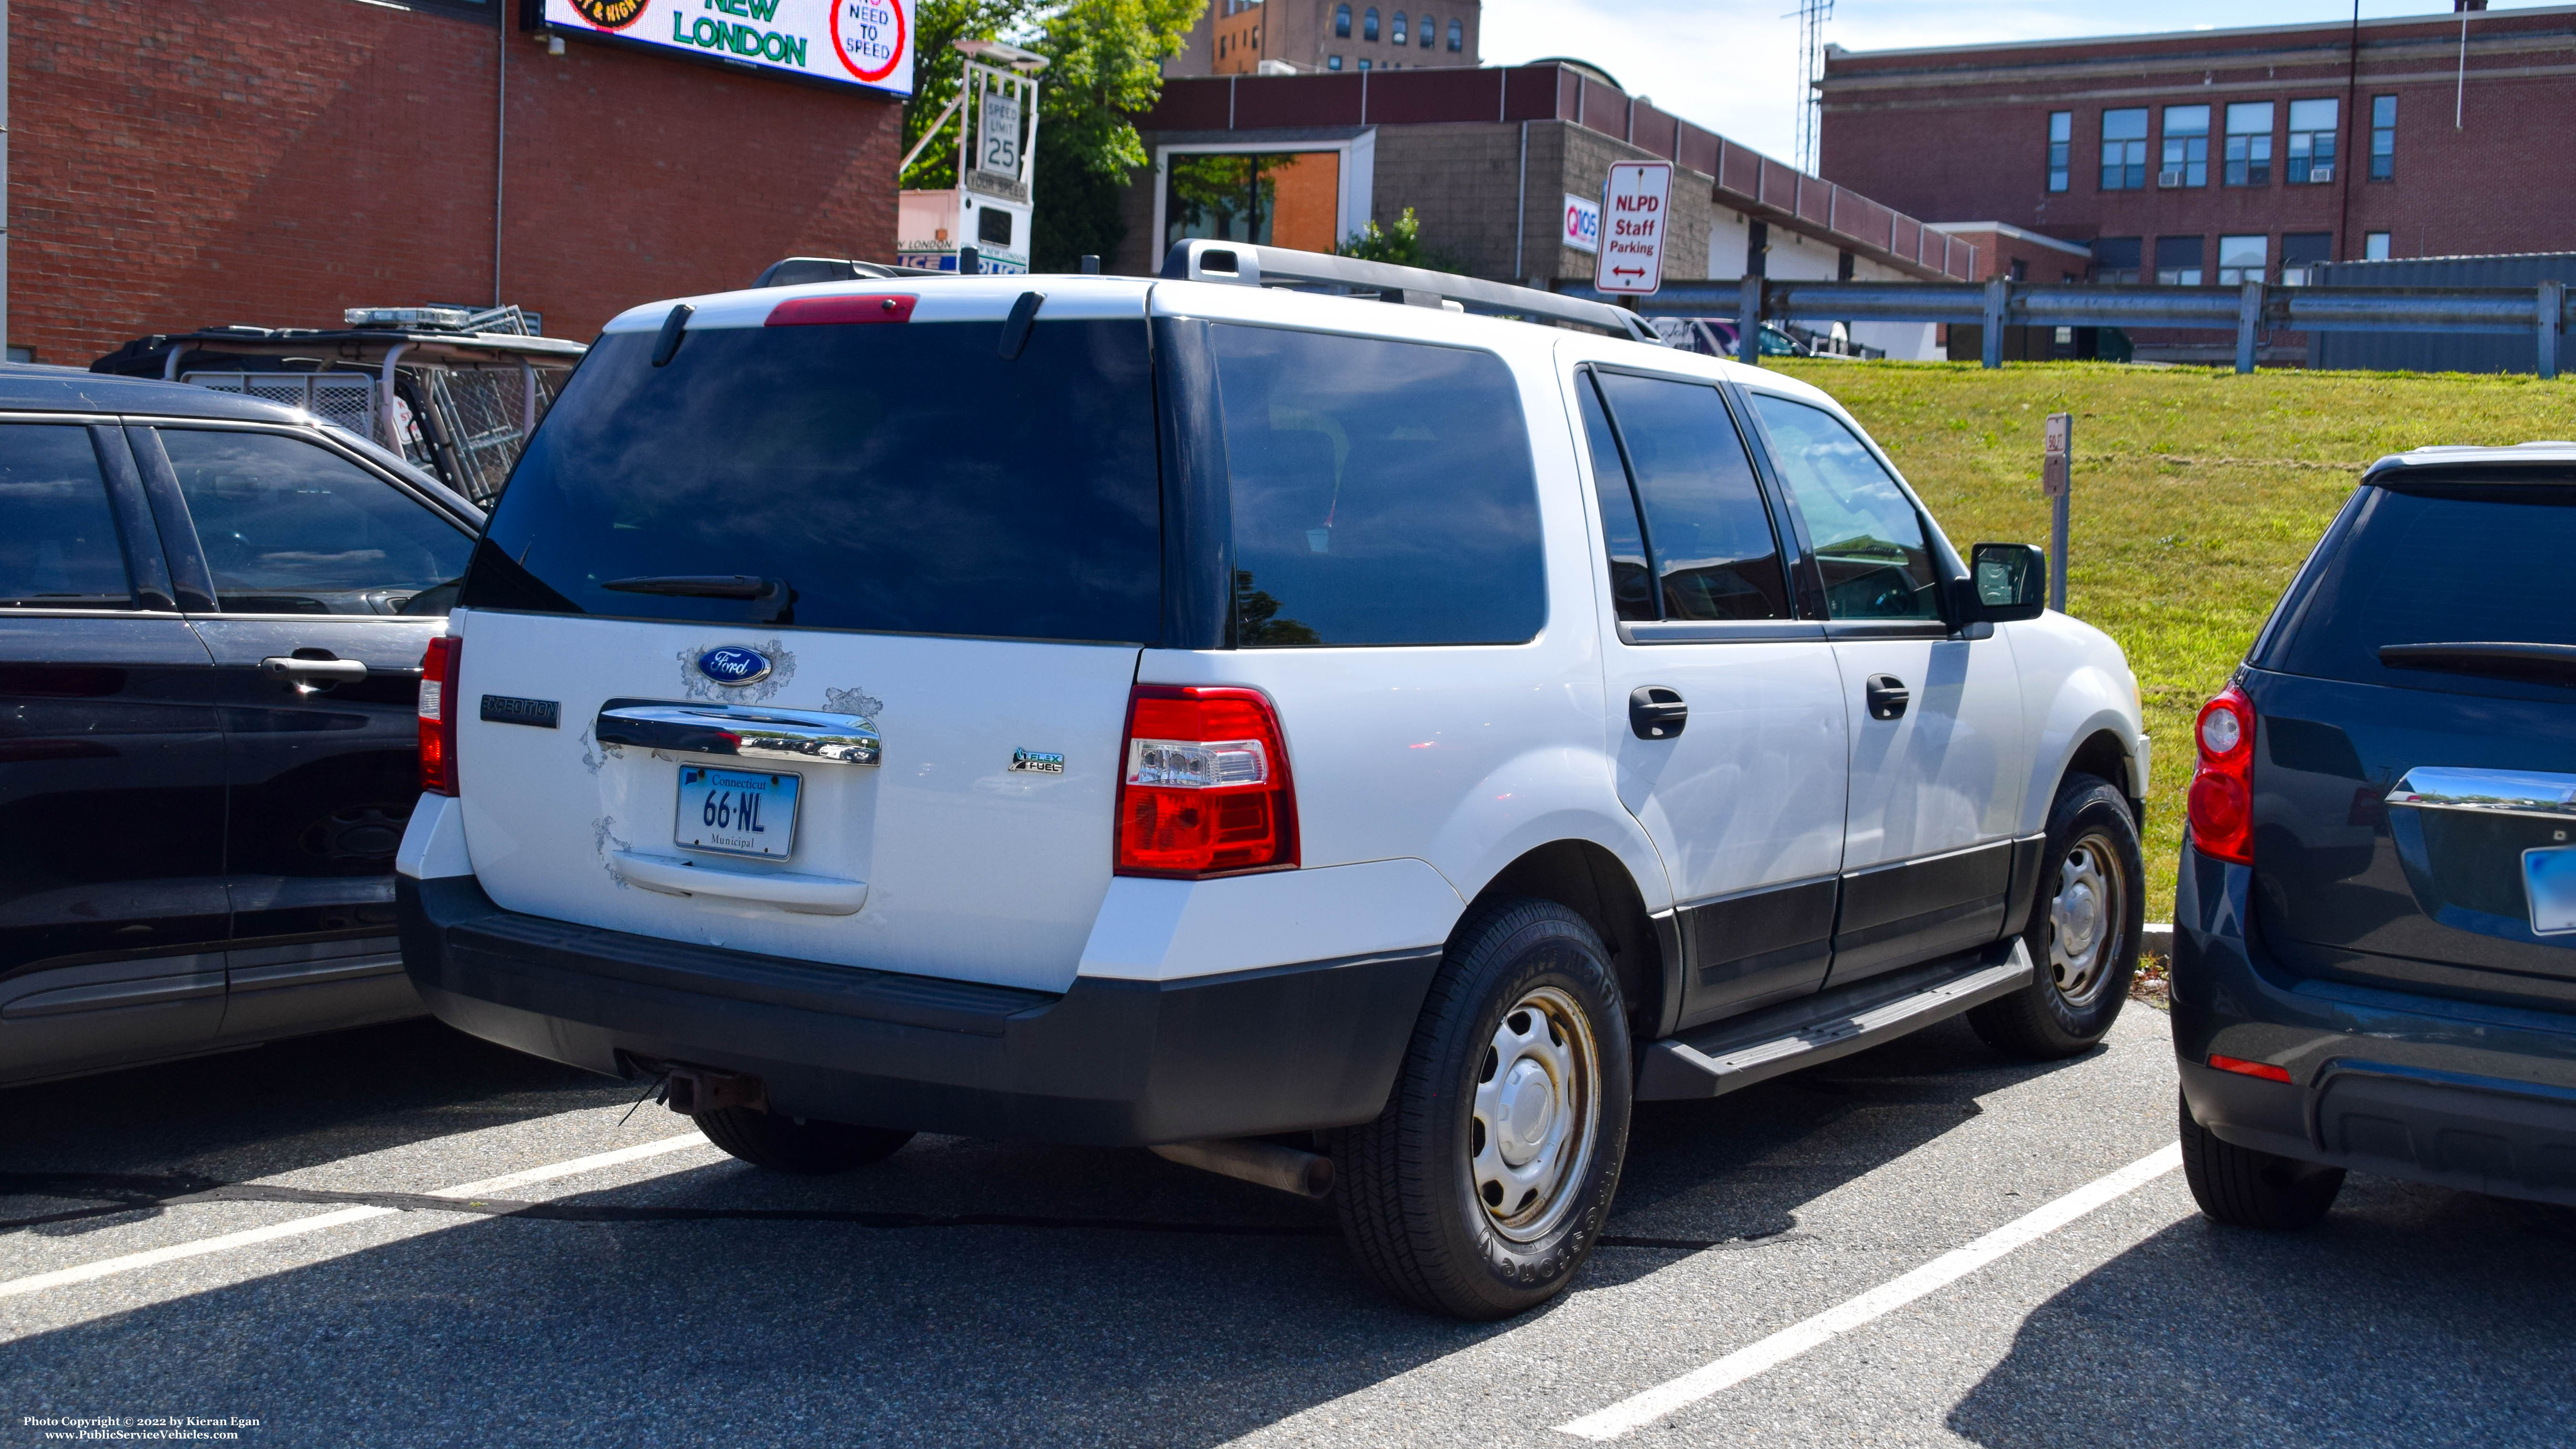 A photo  of New London Police
            Car 66, a 2007-2014 Ford Expedition             taken by Kieran Egan